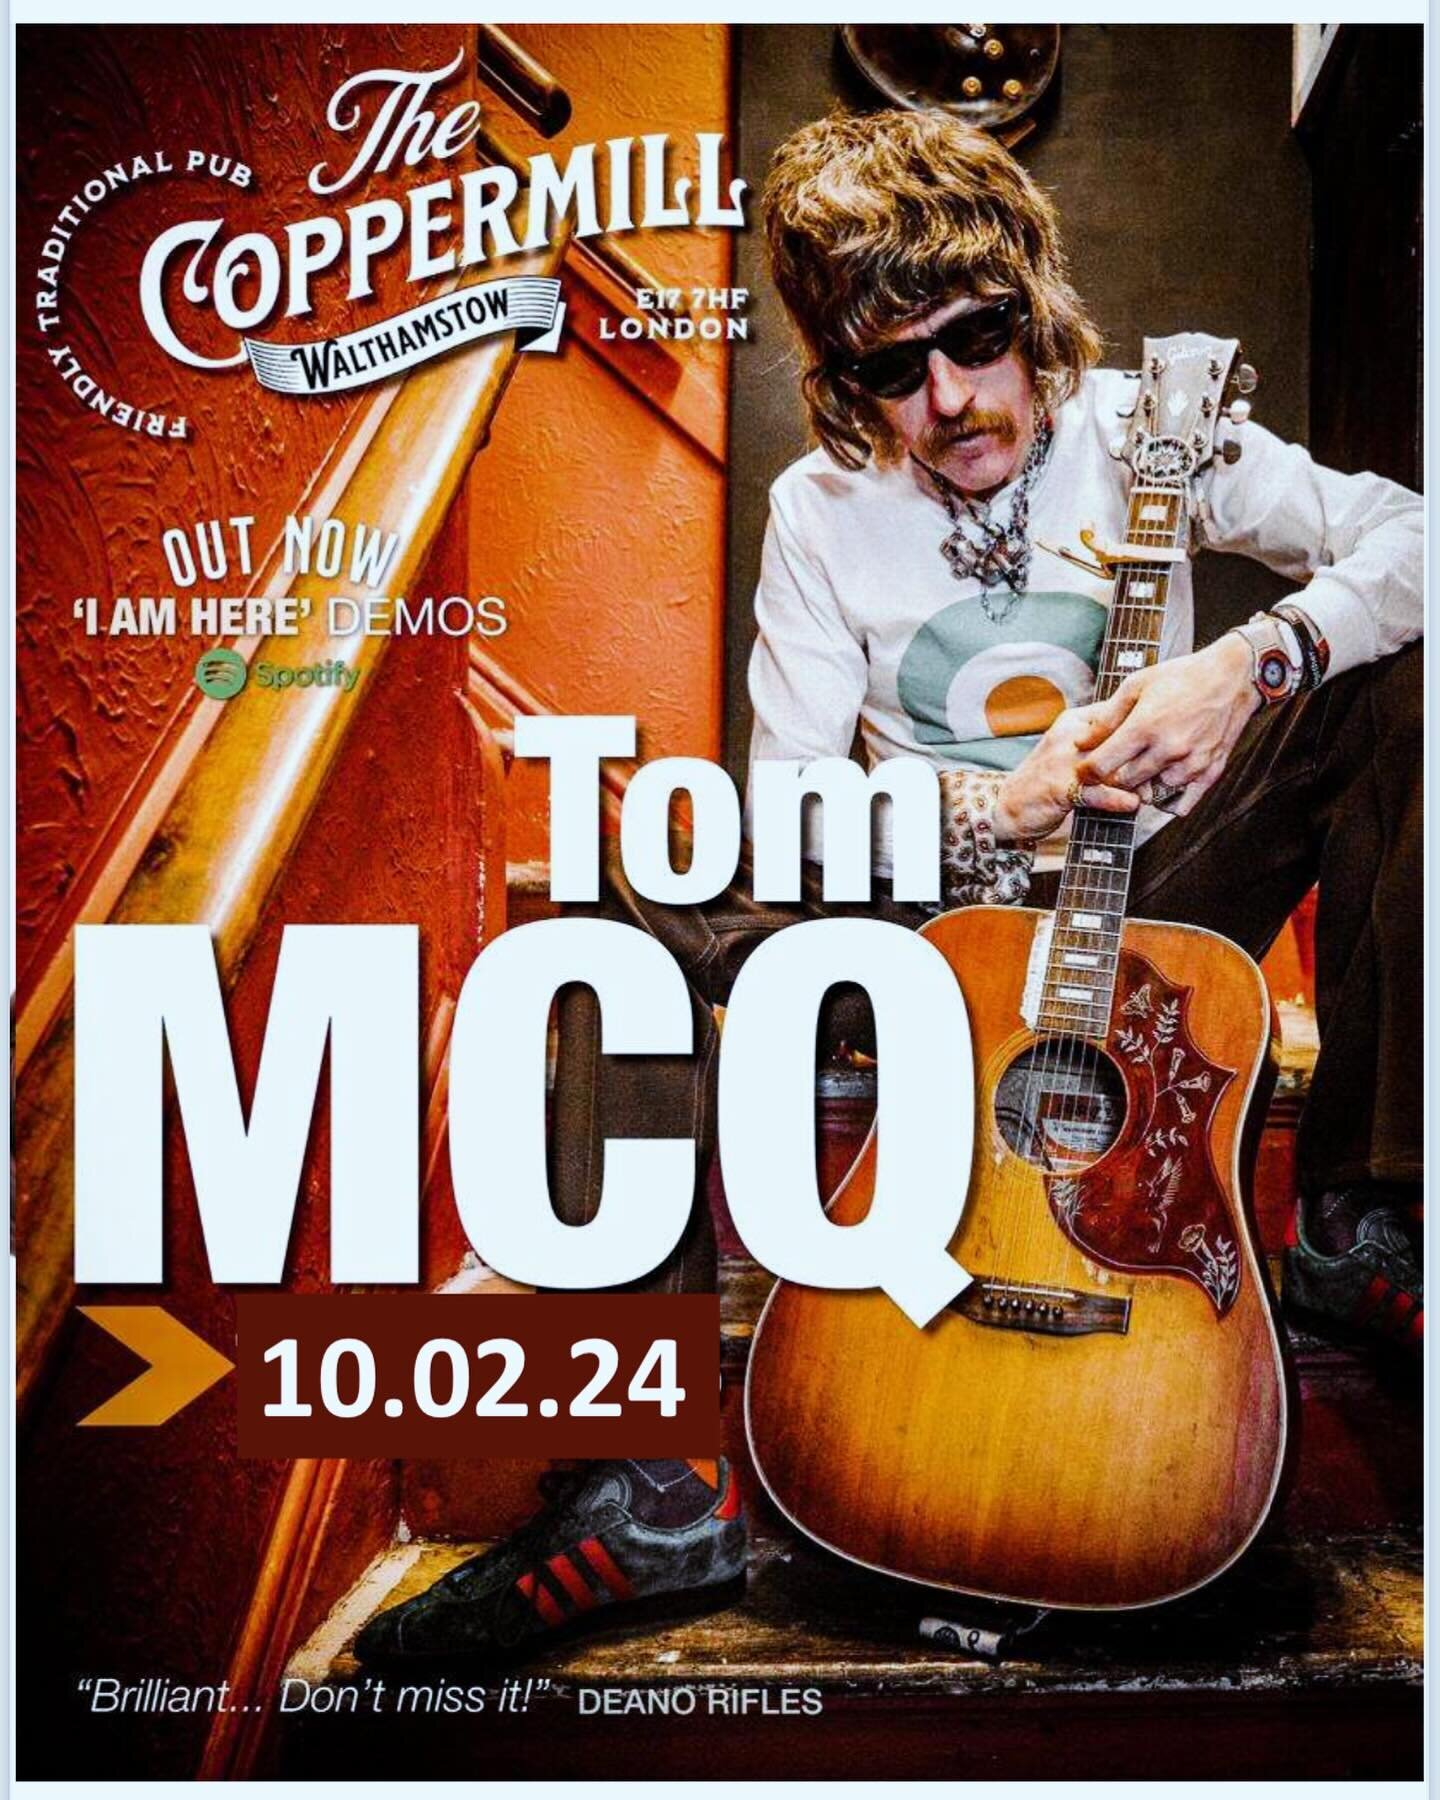 Last gig before heading to play Prague and Budapest. Would love to see you! This is gonna be a great Saturday! Big love!
Rock n Roll and Peace n love! X

#tommcqofficial #thirdwavemusic #tonight #saturday #thecoppermill #rocknroll #original #freeentr